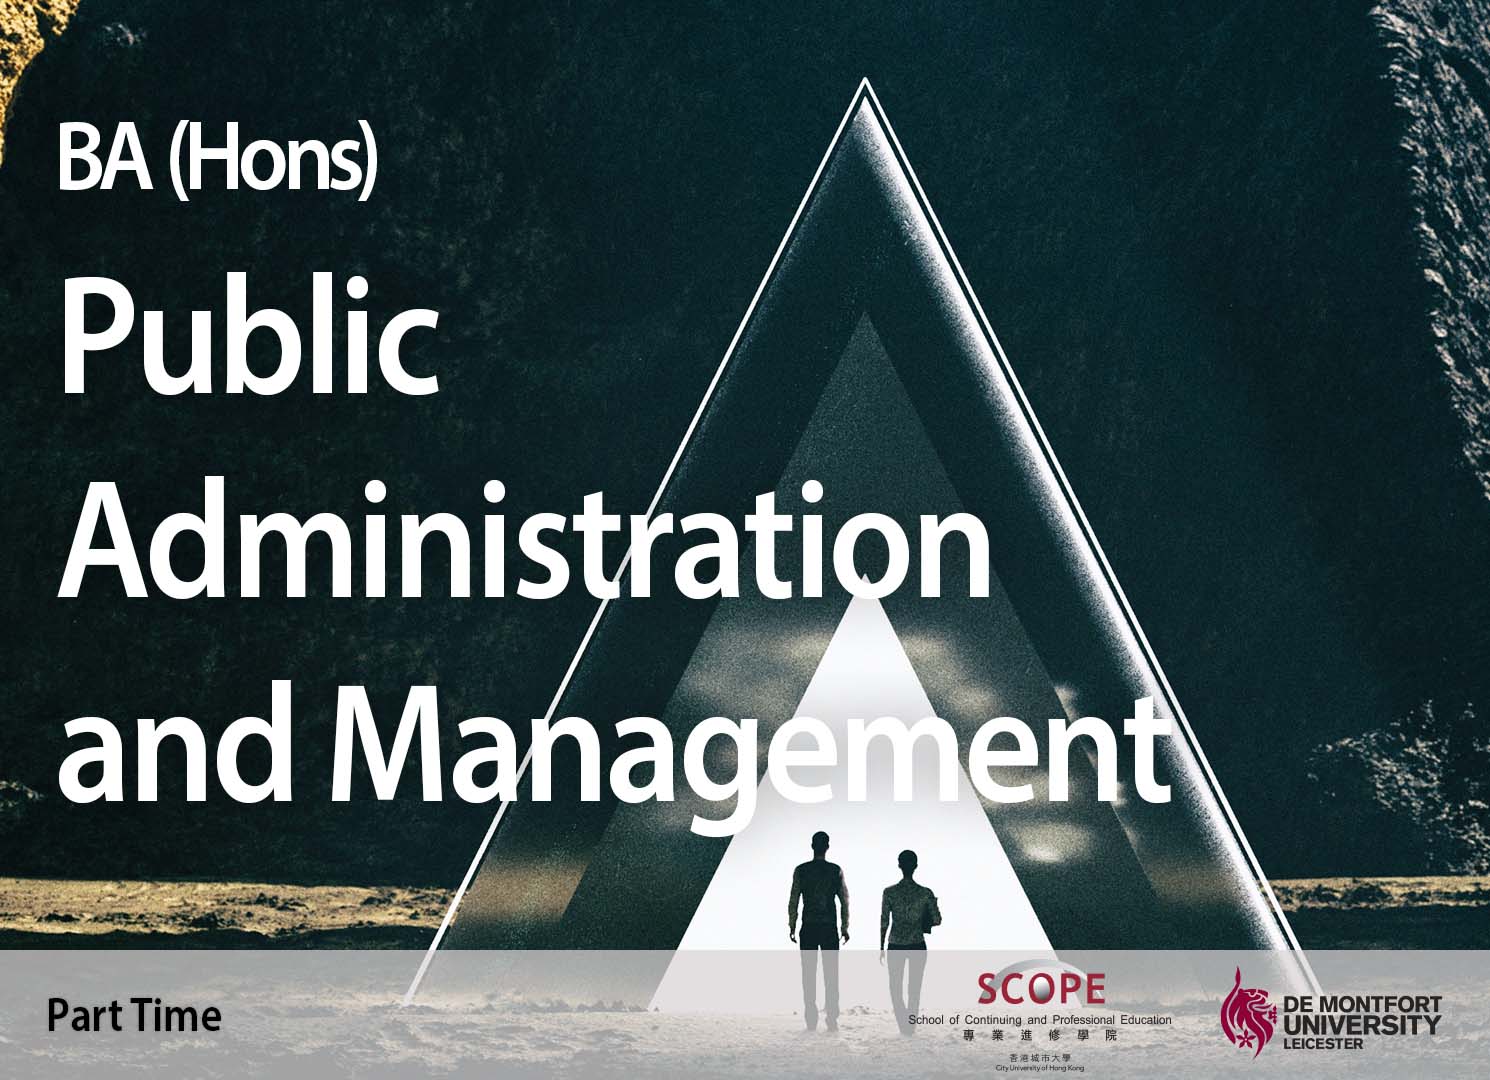 BA (Hons) Public Administration and Management